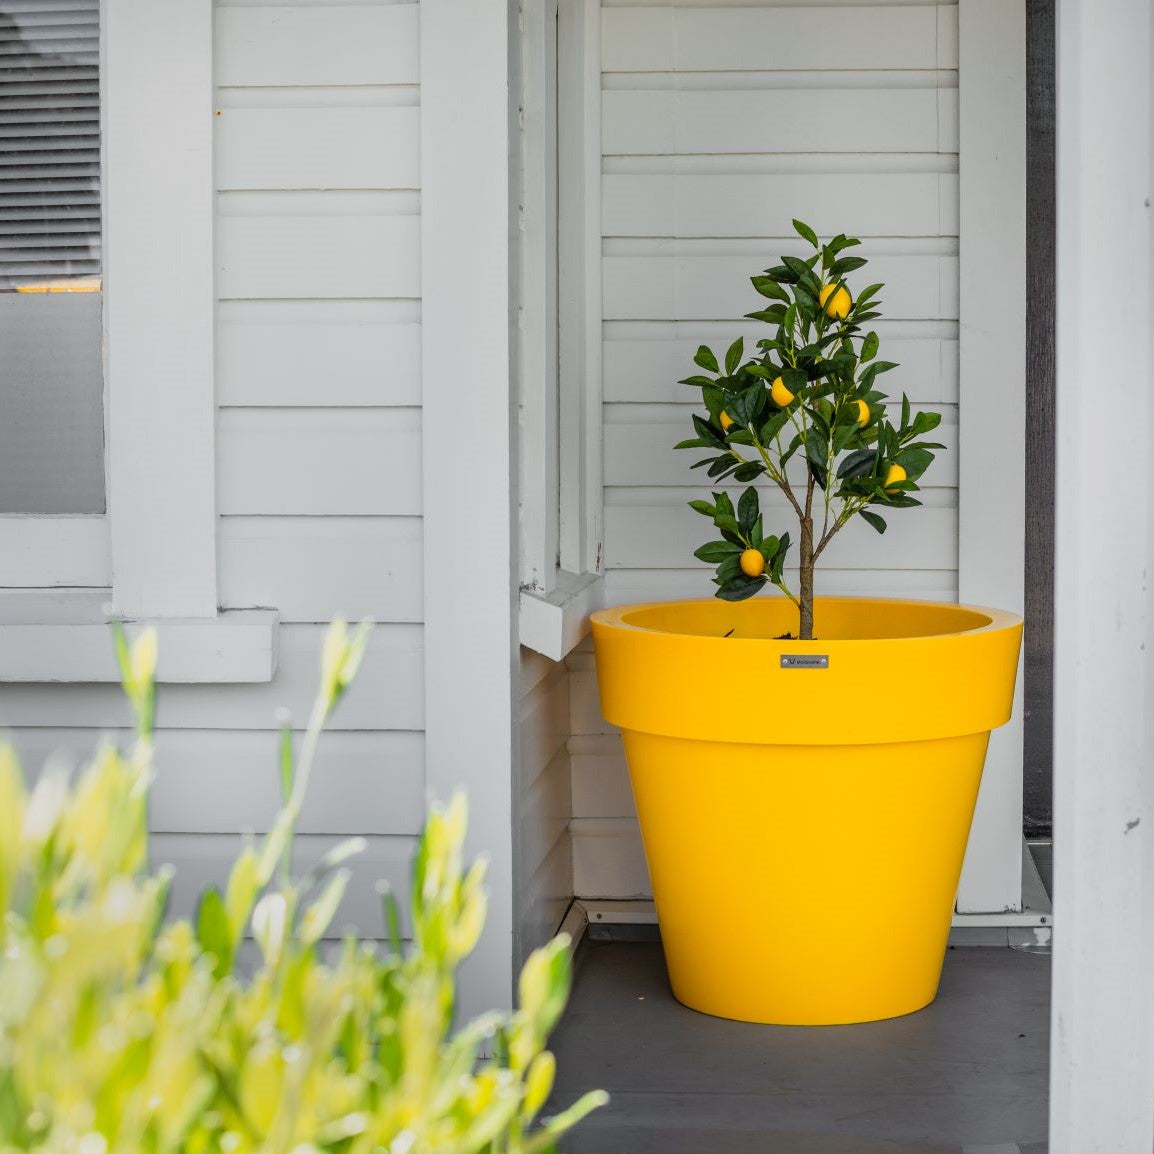 A potted lemon tree planted in a yellow planter pot.